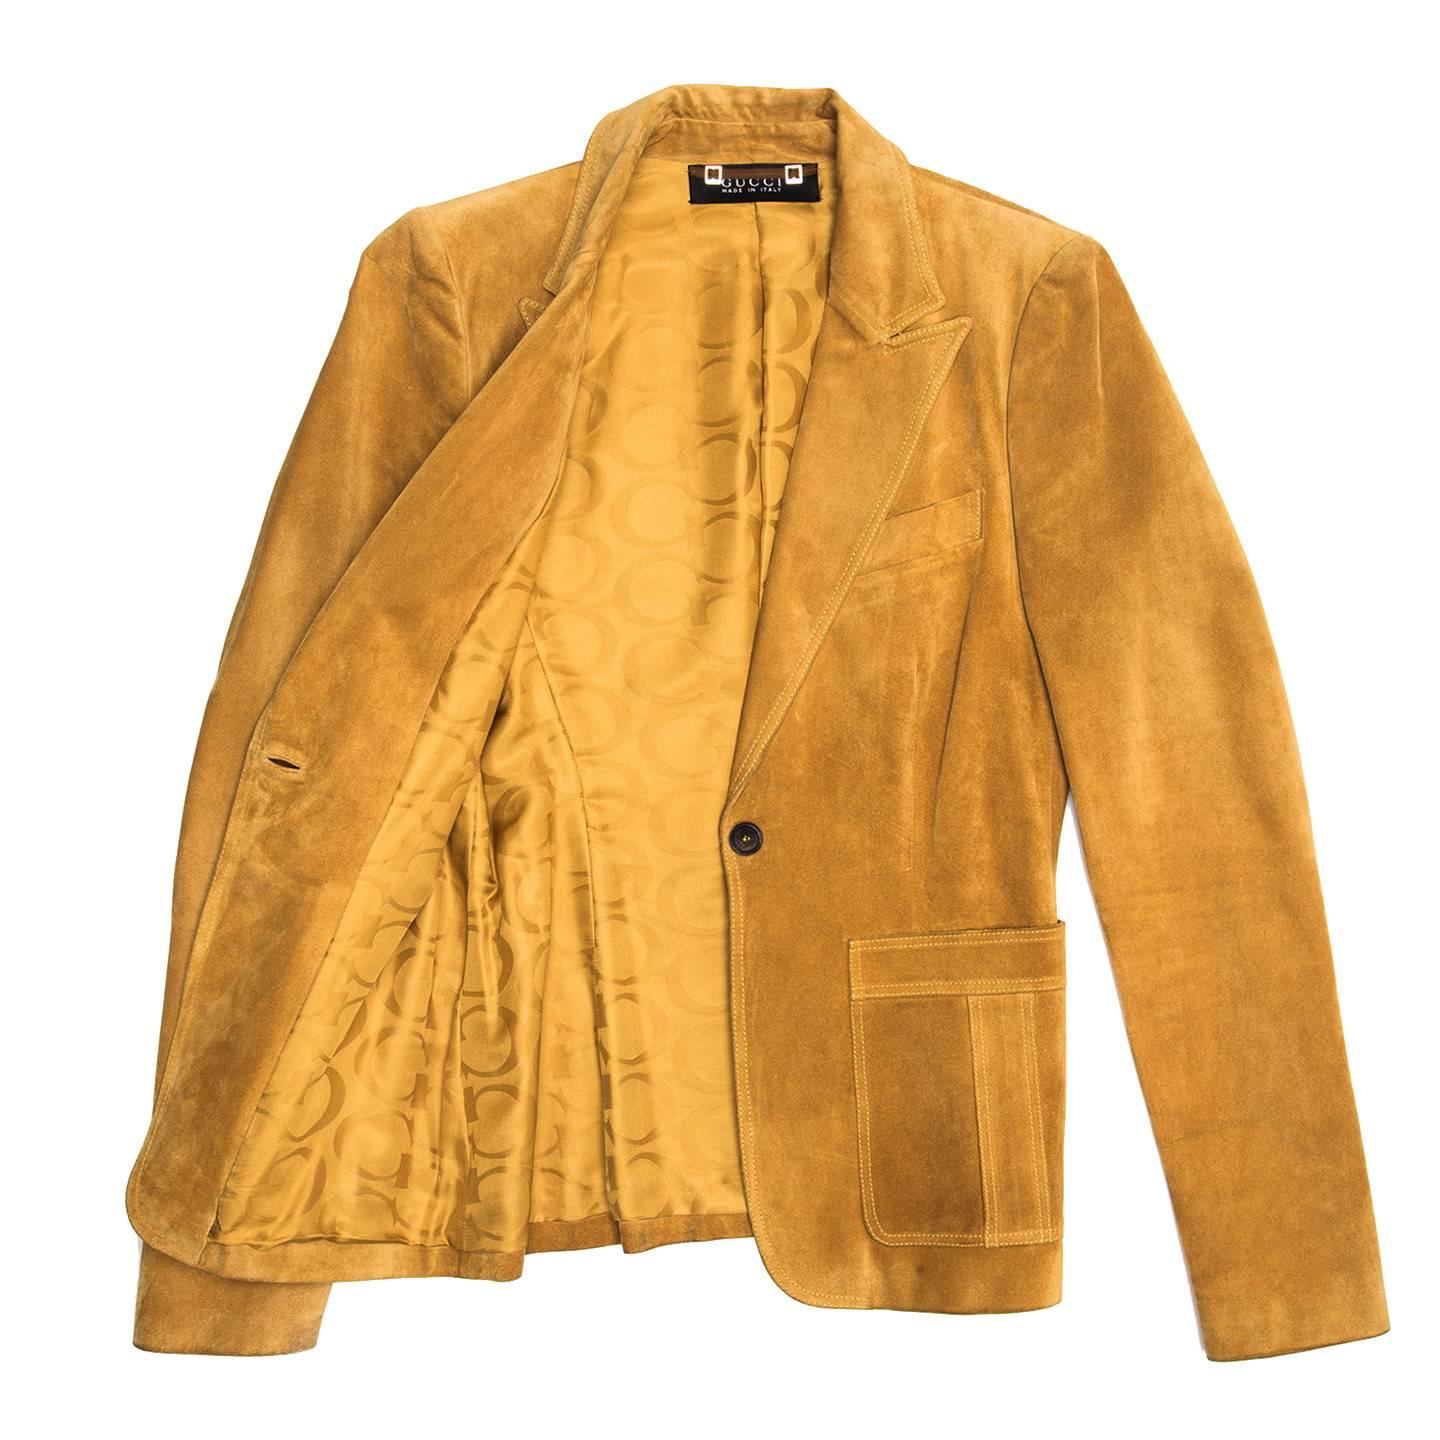 Gucci Ochre Suede Single Breasted Blazer In Excellent Condition For Sale In Brooklyn, NY